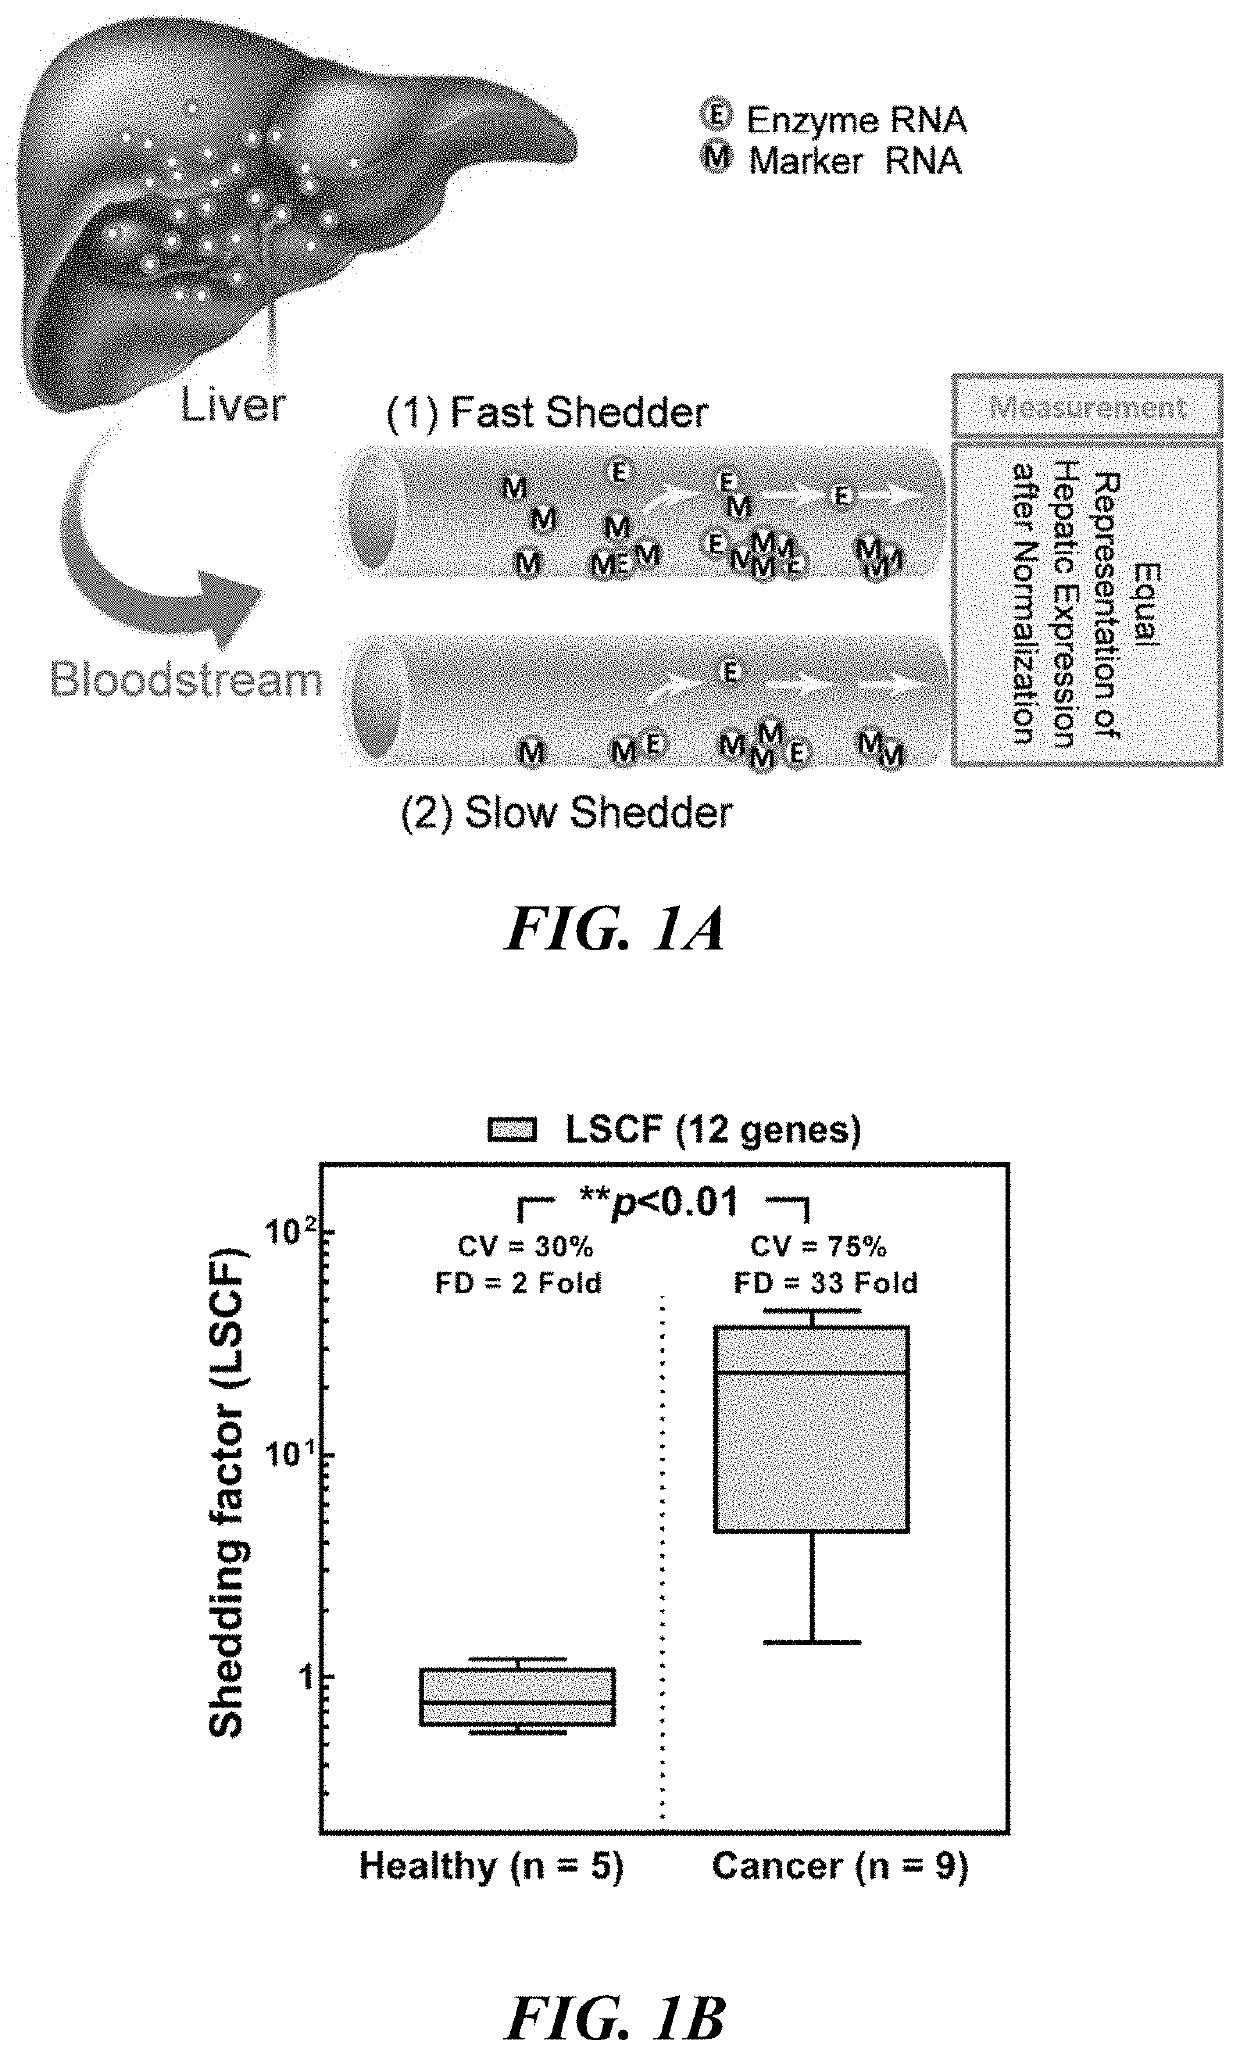 Methods and apparatus for quantifying protein abundance in tissues via cell free ribonucleic acids in liquid biopsy